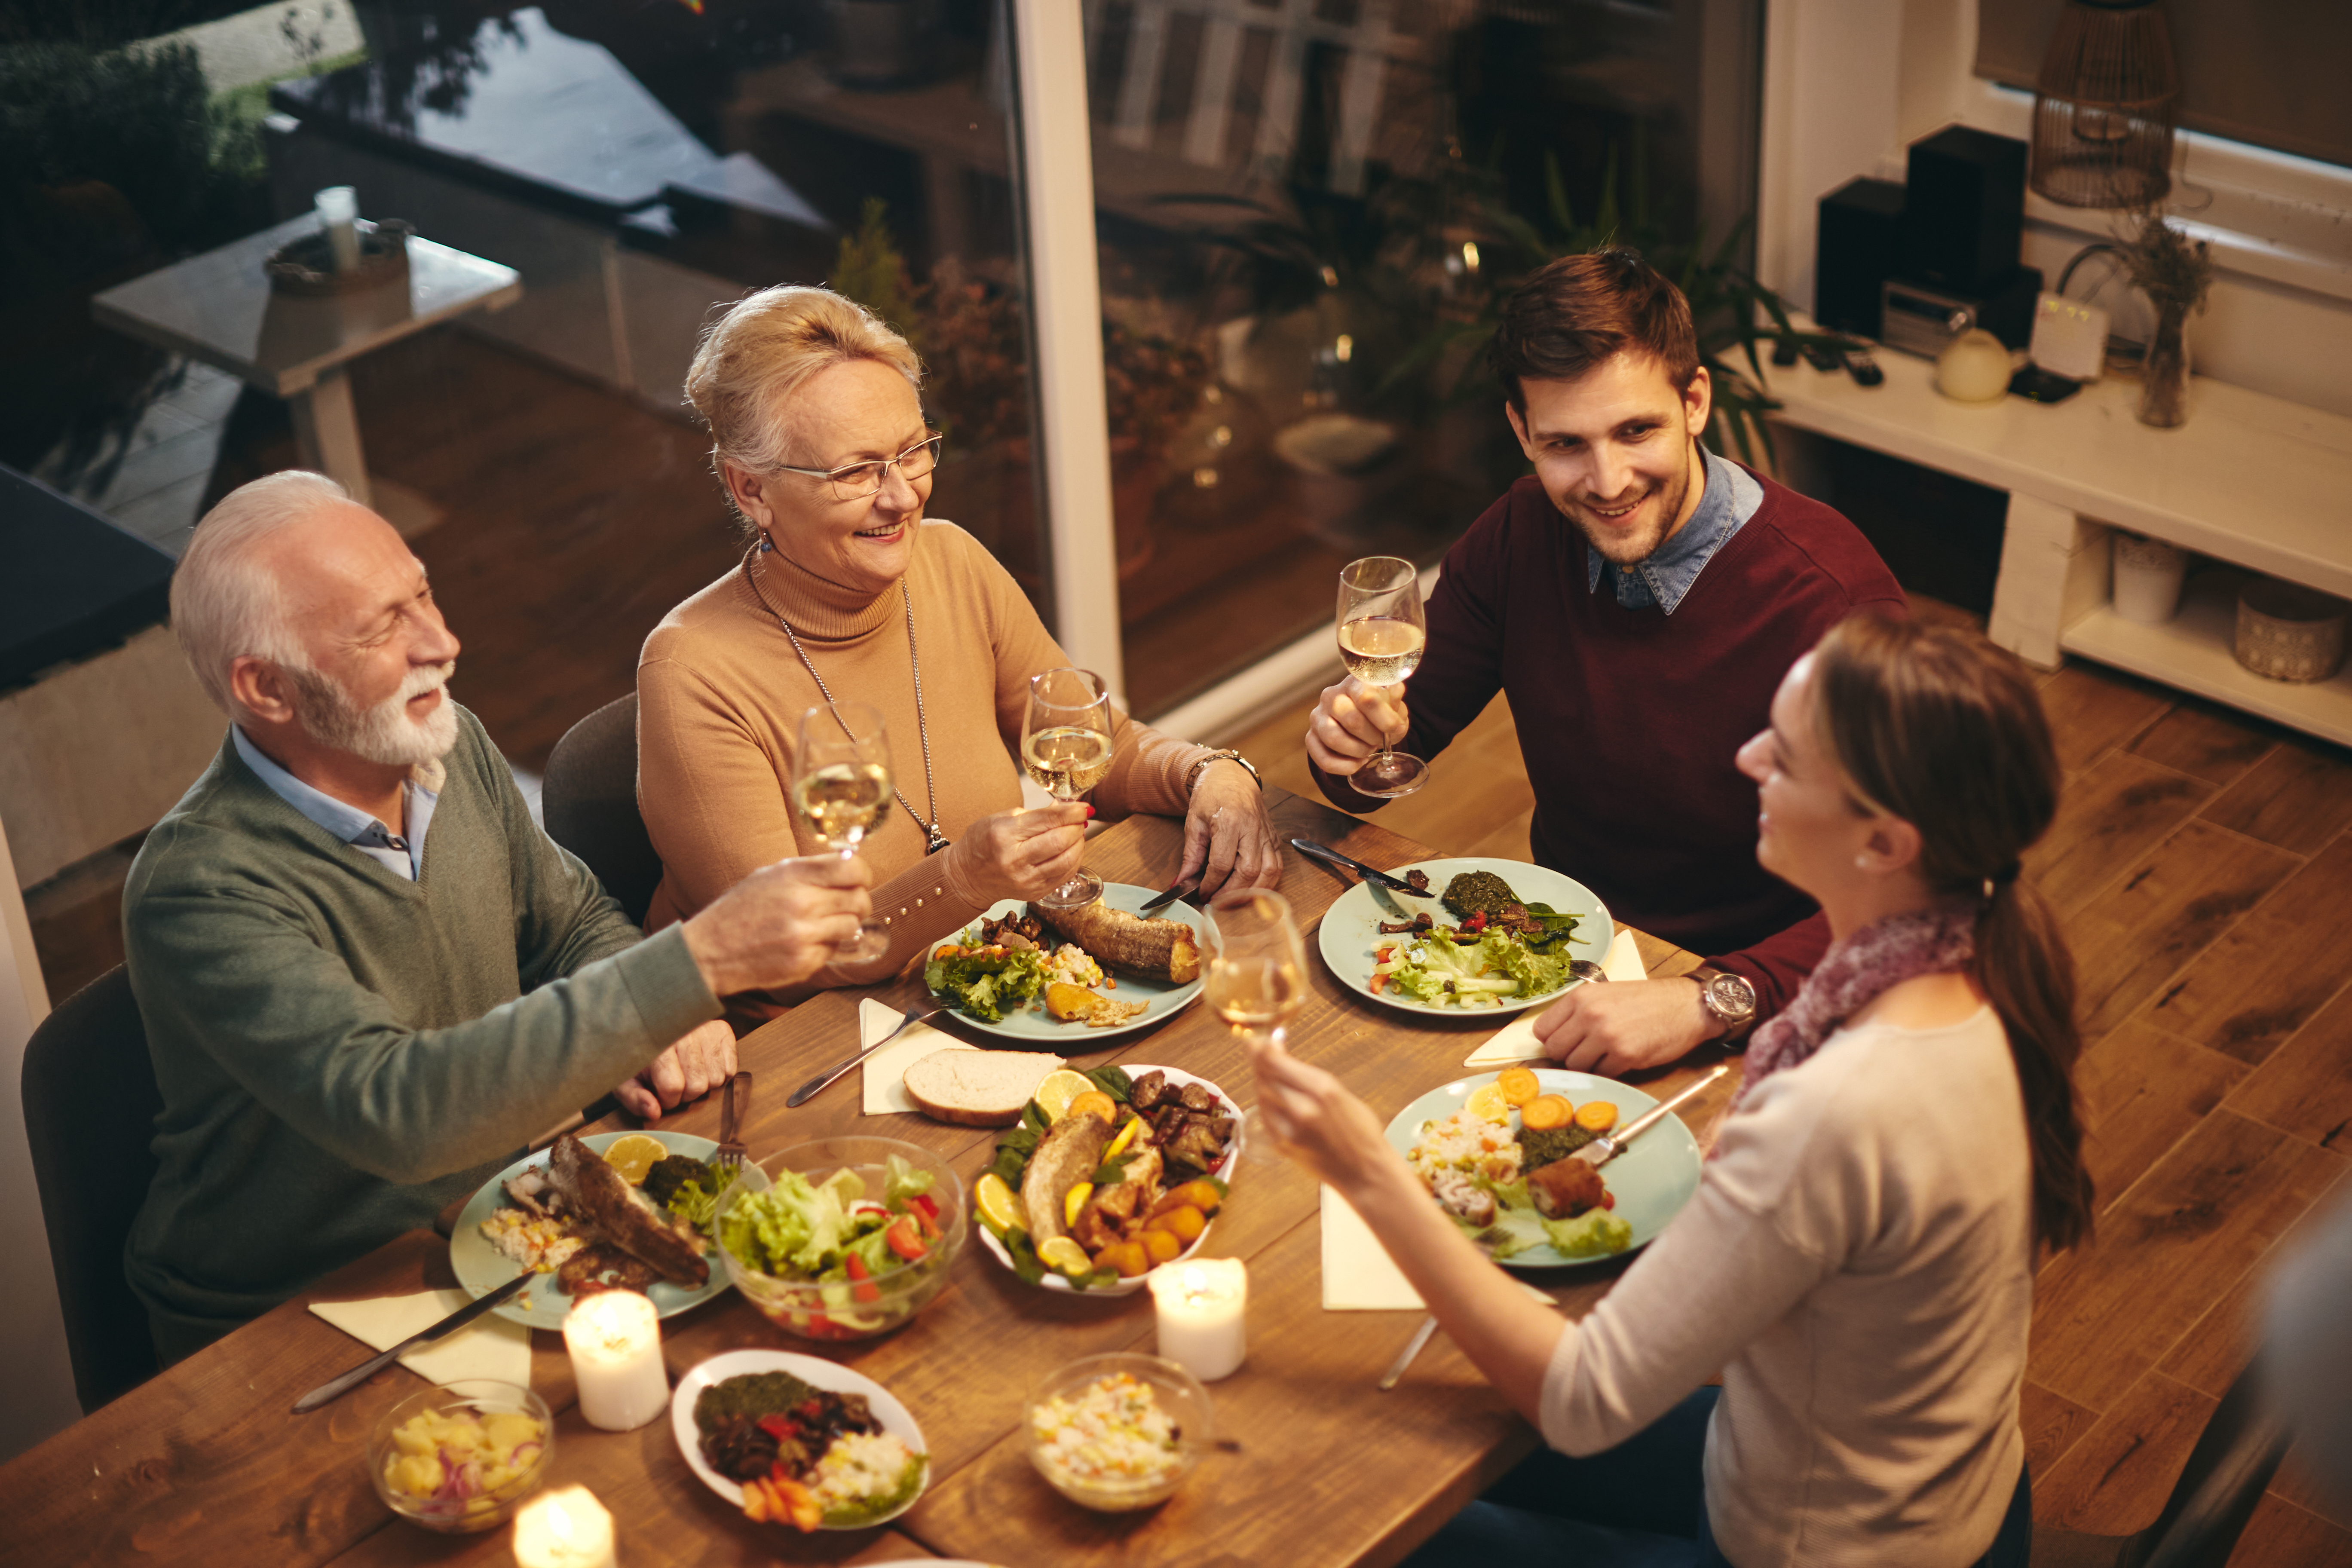 A happy senior woman toasting with her family while having a meal at dining table | Source: Shutterstock